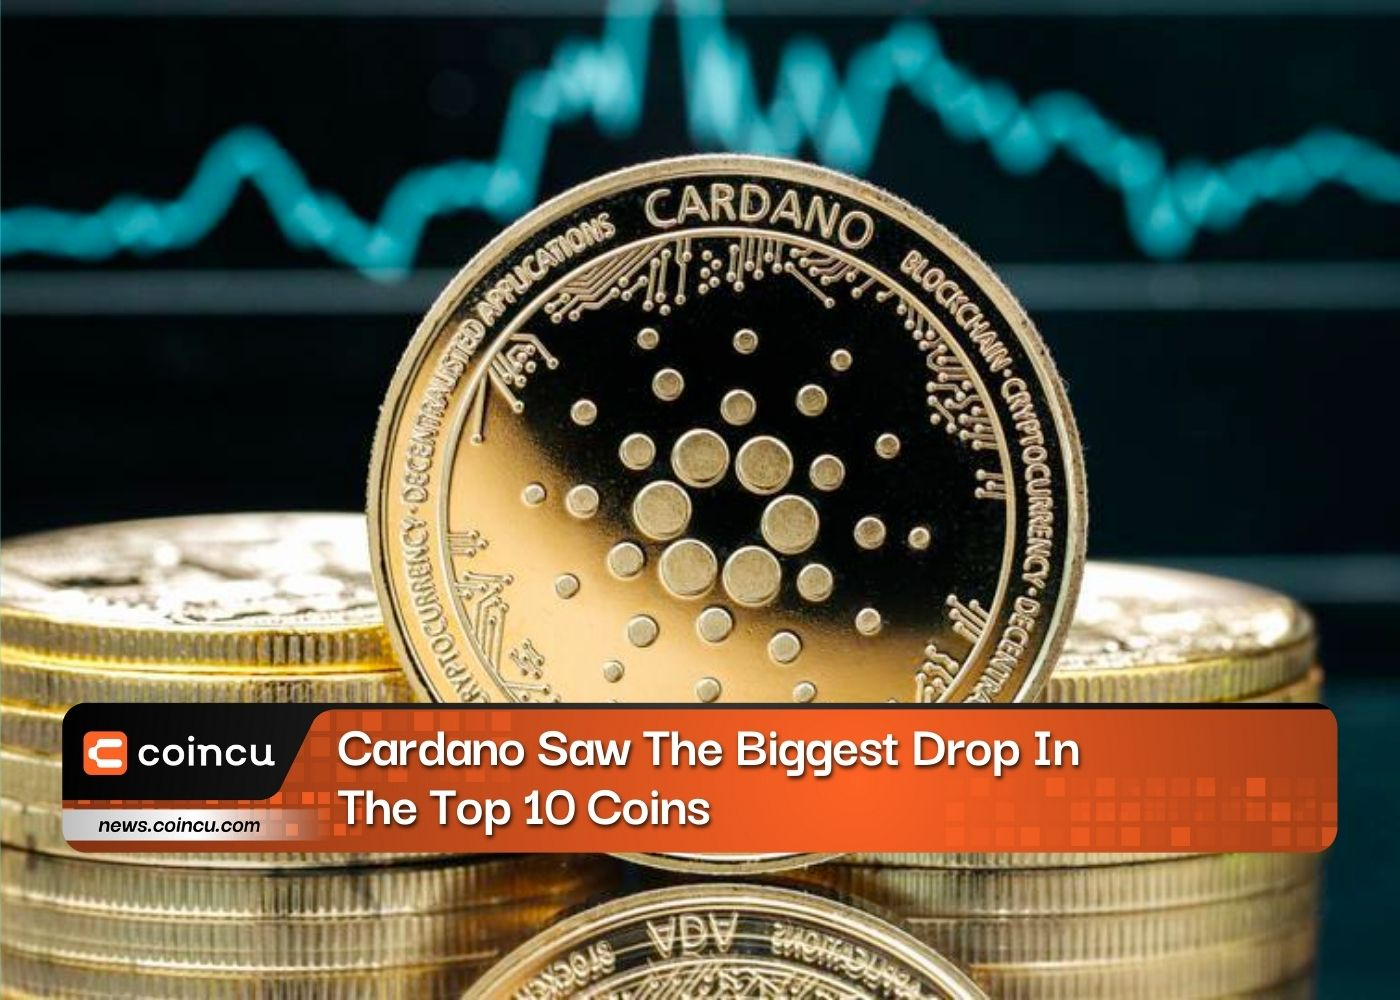 Cardano Saw The Biggest Drop In The Top 10 Coins